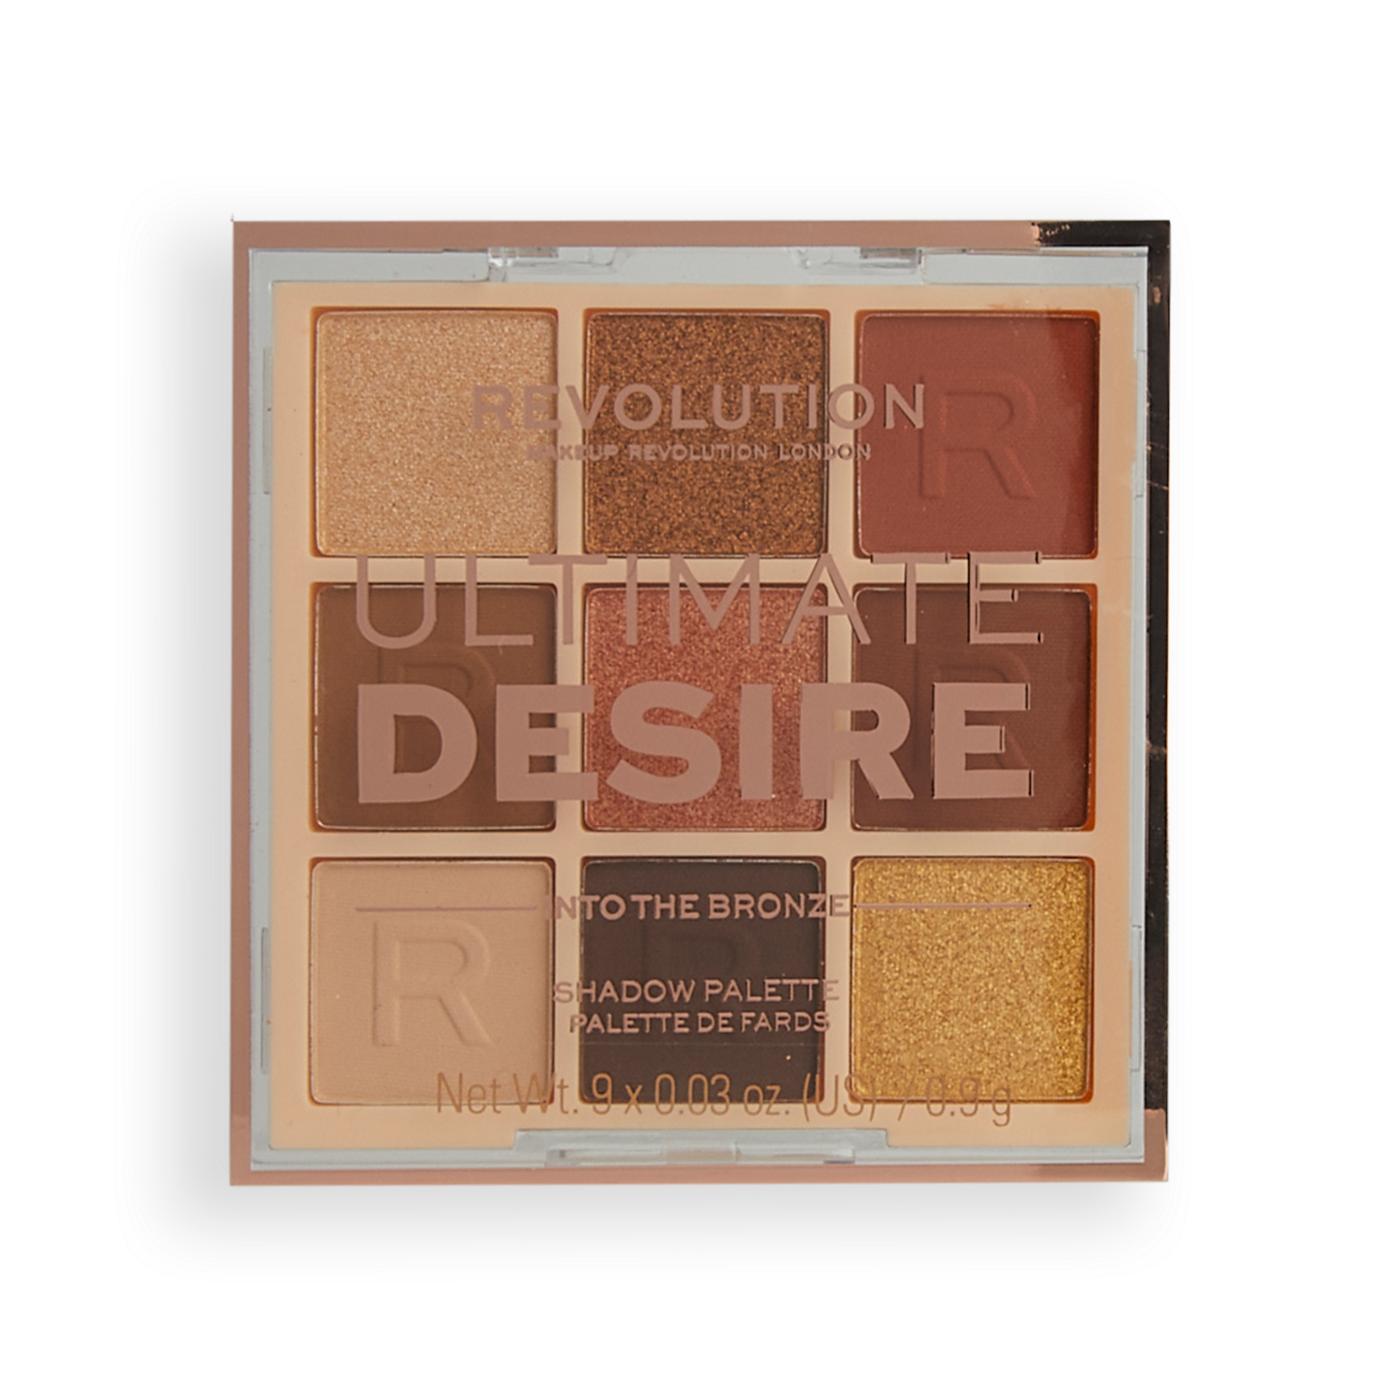 Makeup Revolution Ultimate Desire Shadow Palette - Into the Bronze; image 1 of 5